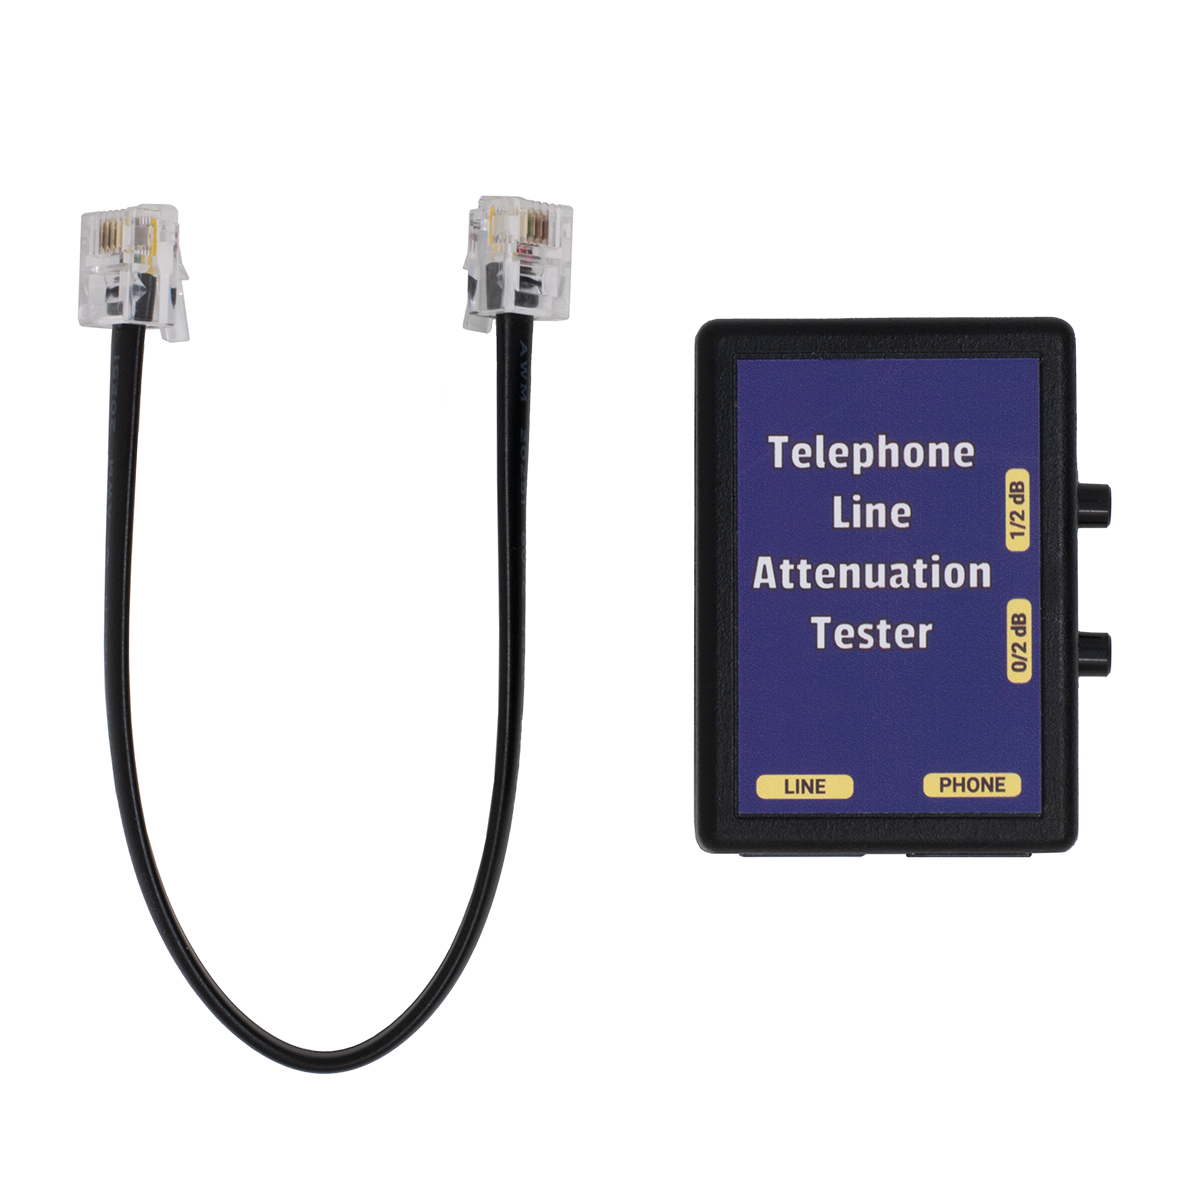 Phone Line Attenuation Tester (Top View)